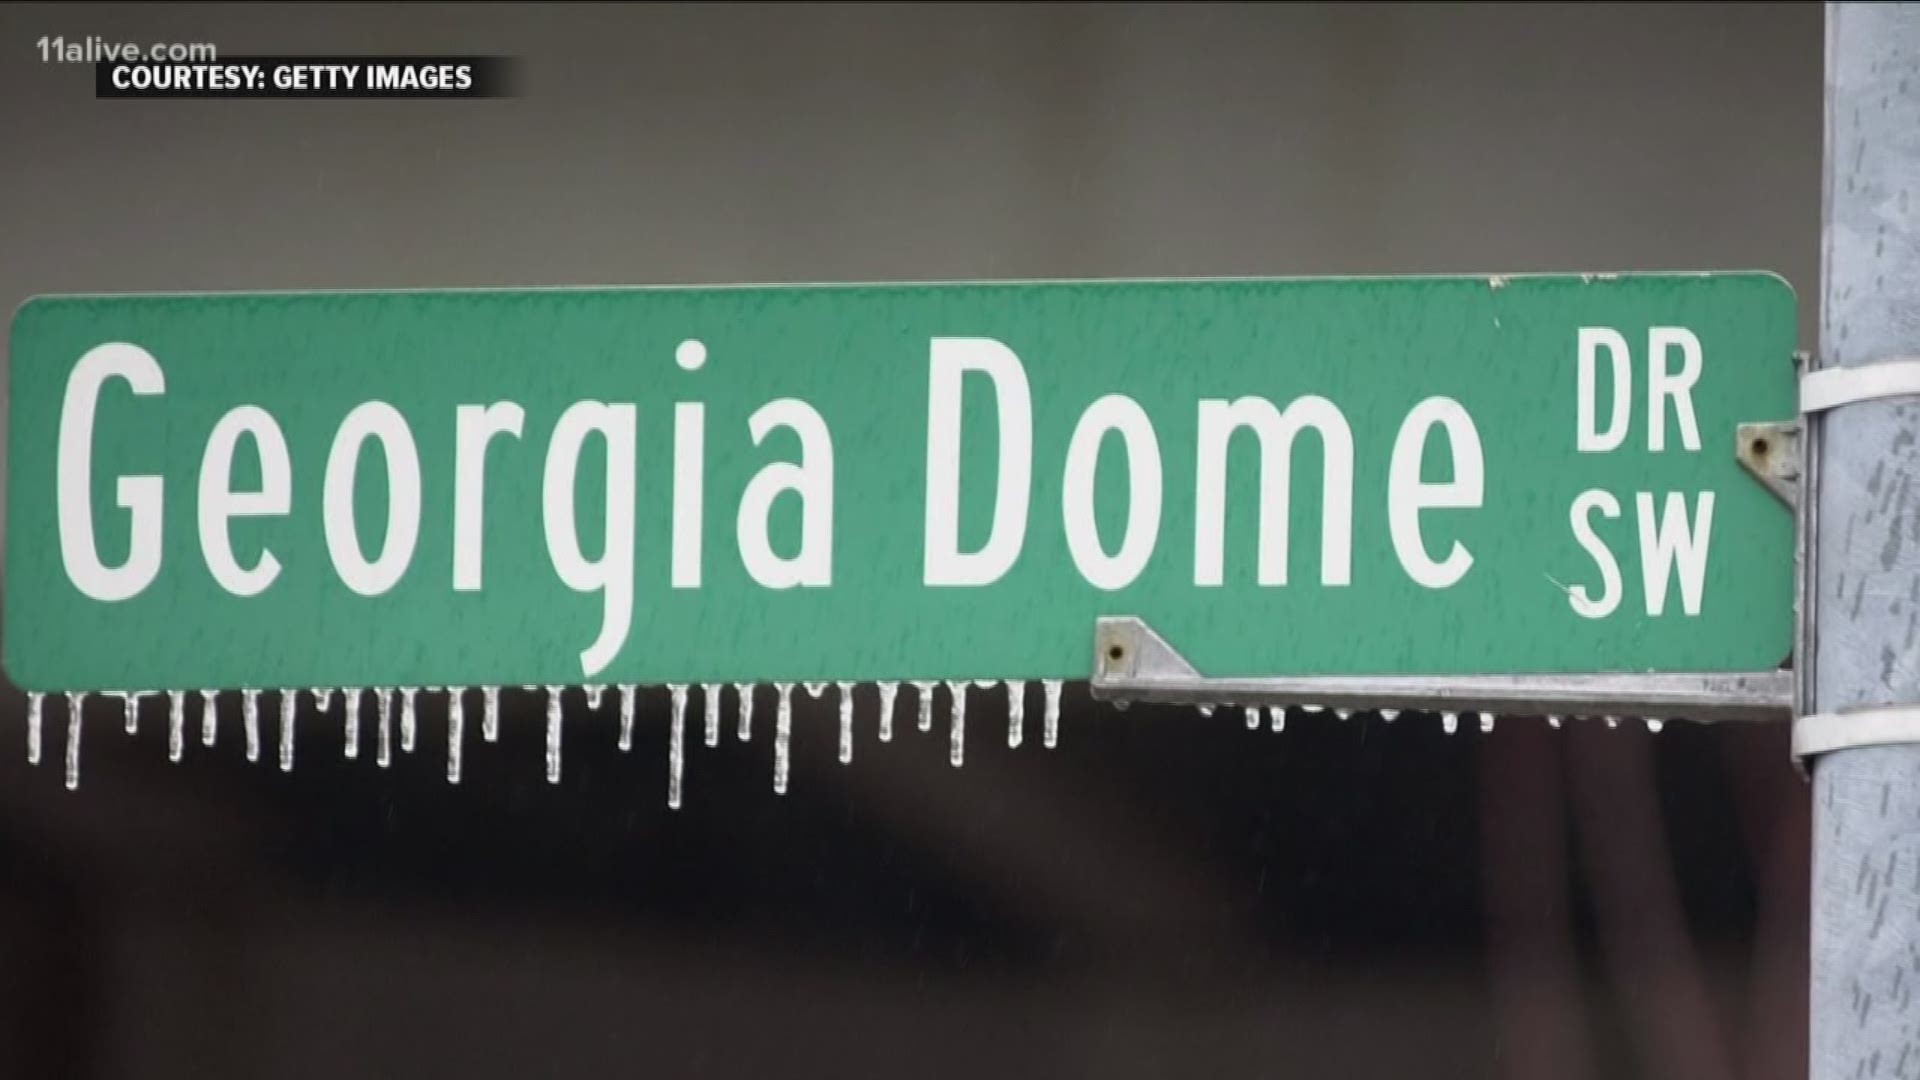 Here is a look at the ice storm from 2000.